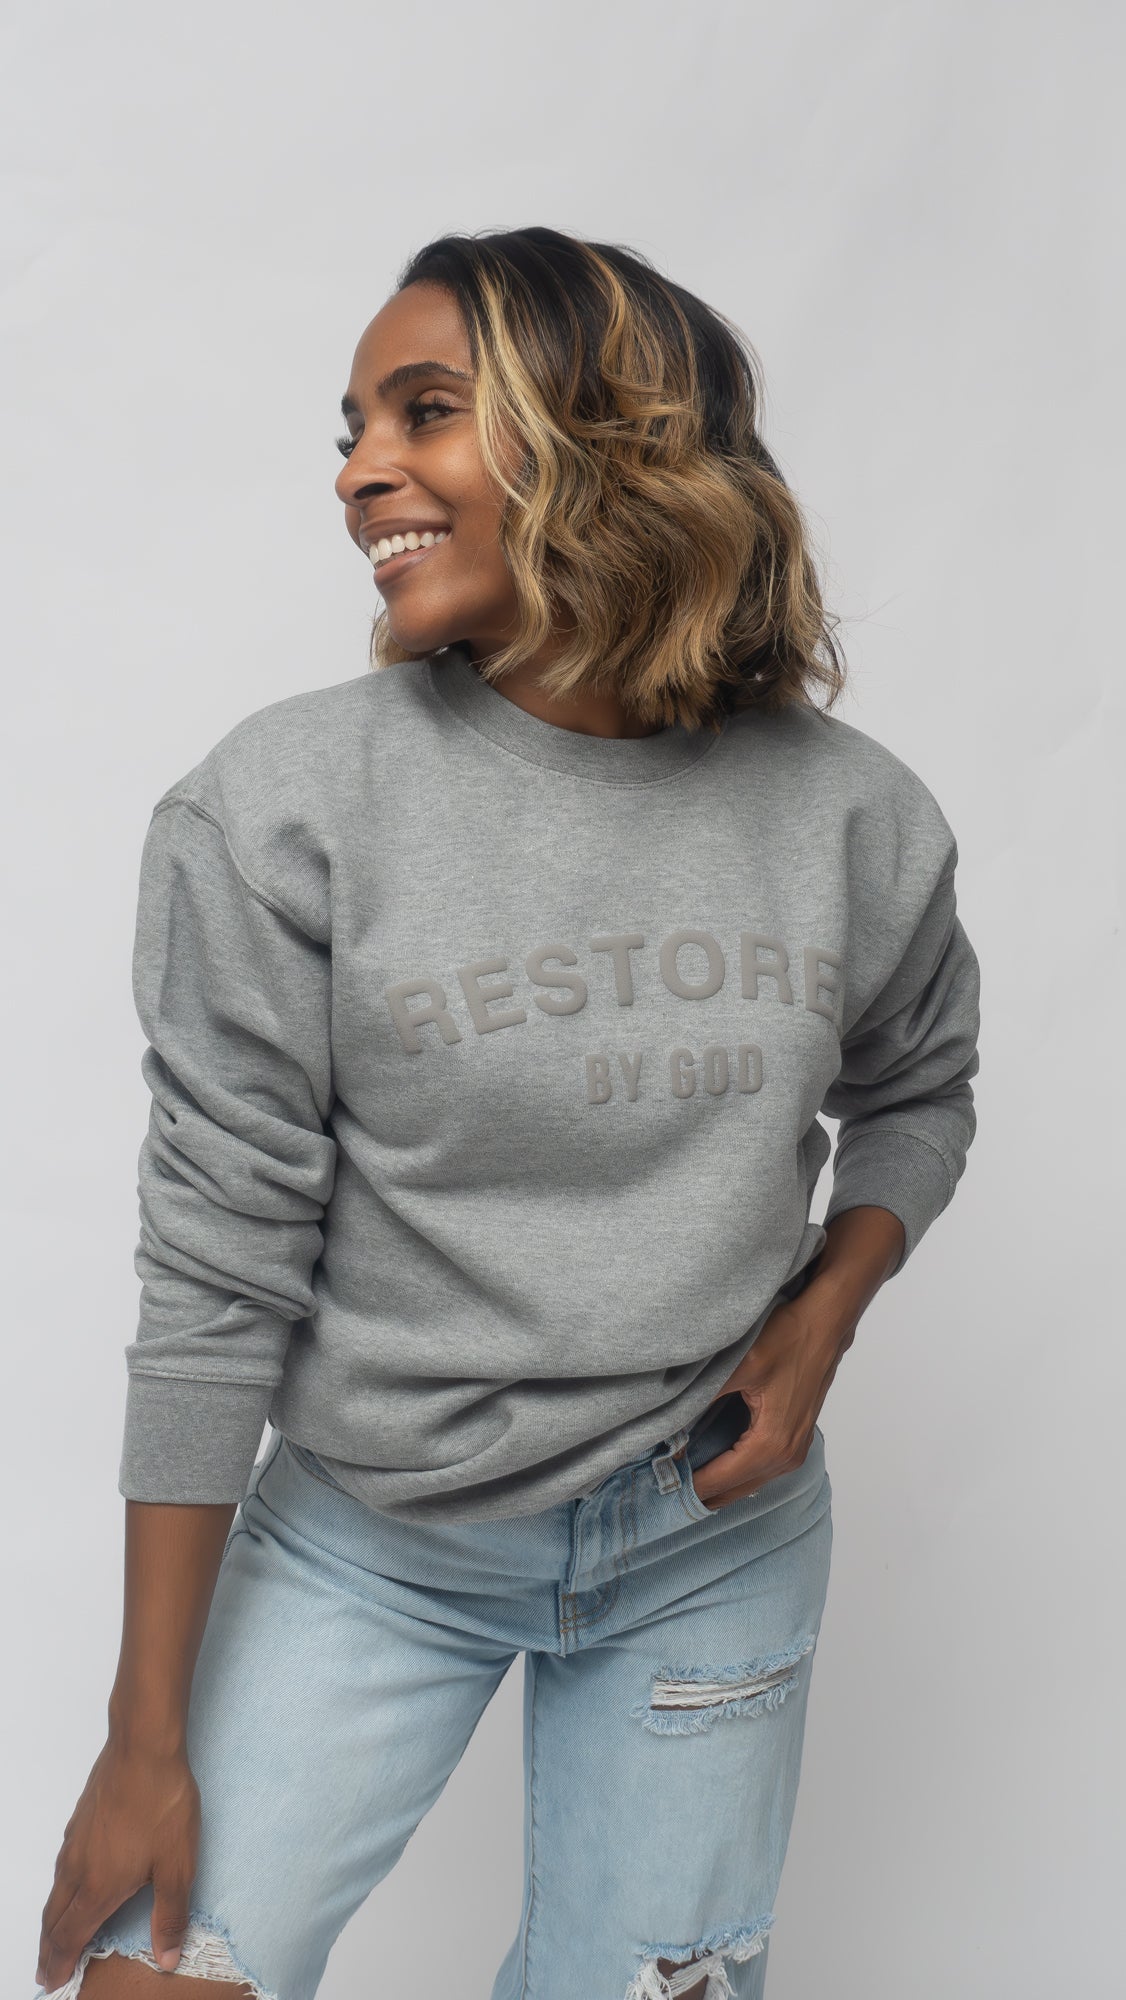 Restored by god grey christian streetwear unisex crewneck sweatshirt for fall weather in the color grey